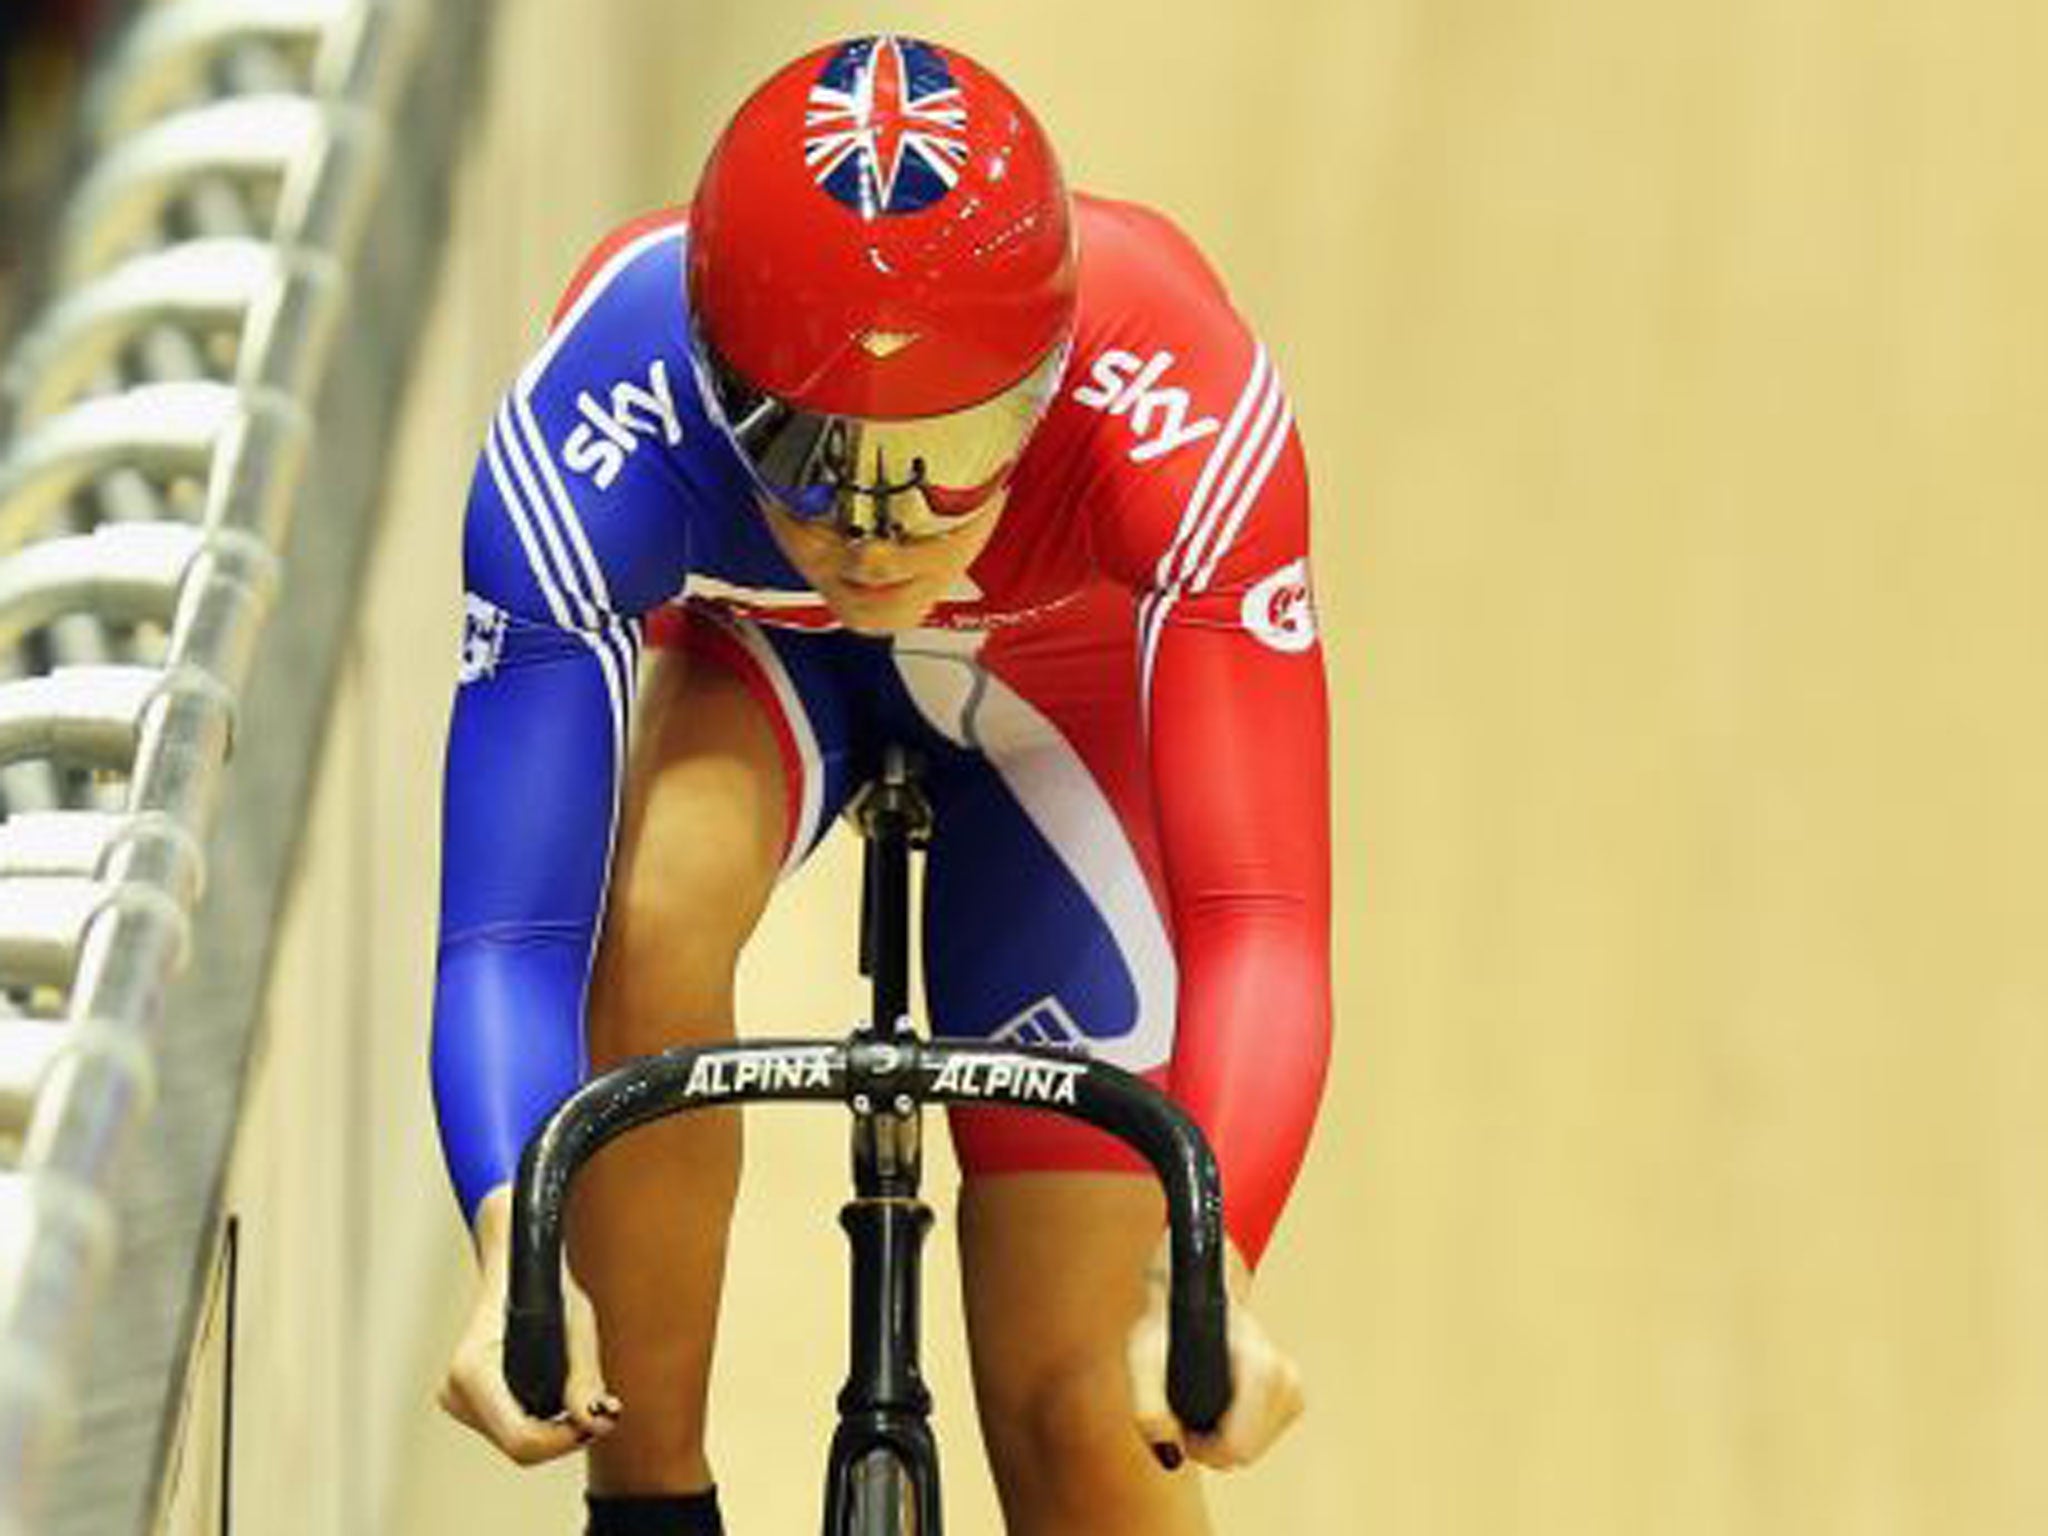 Sprinter Jess Varnish will be in her track cycling prime for the Rio Olympics in 2016